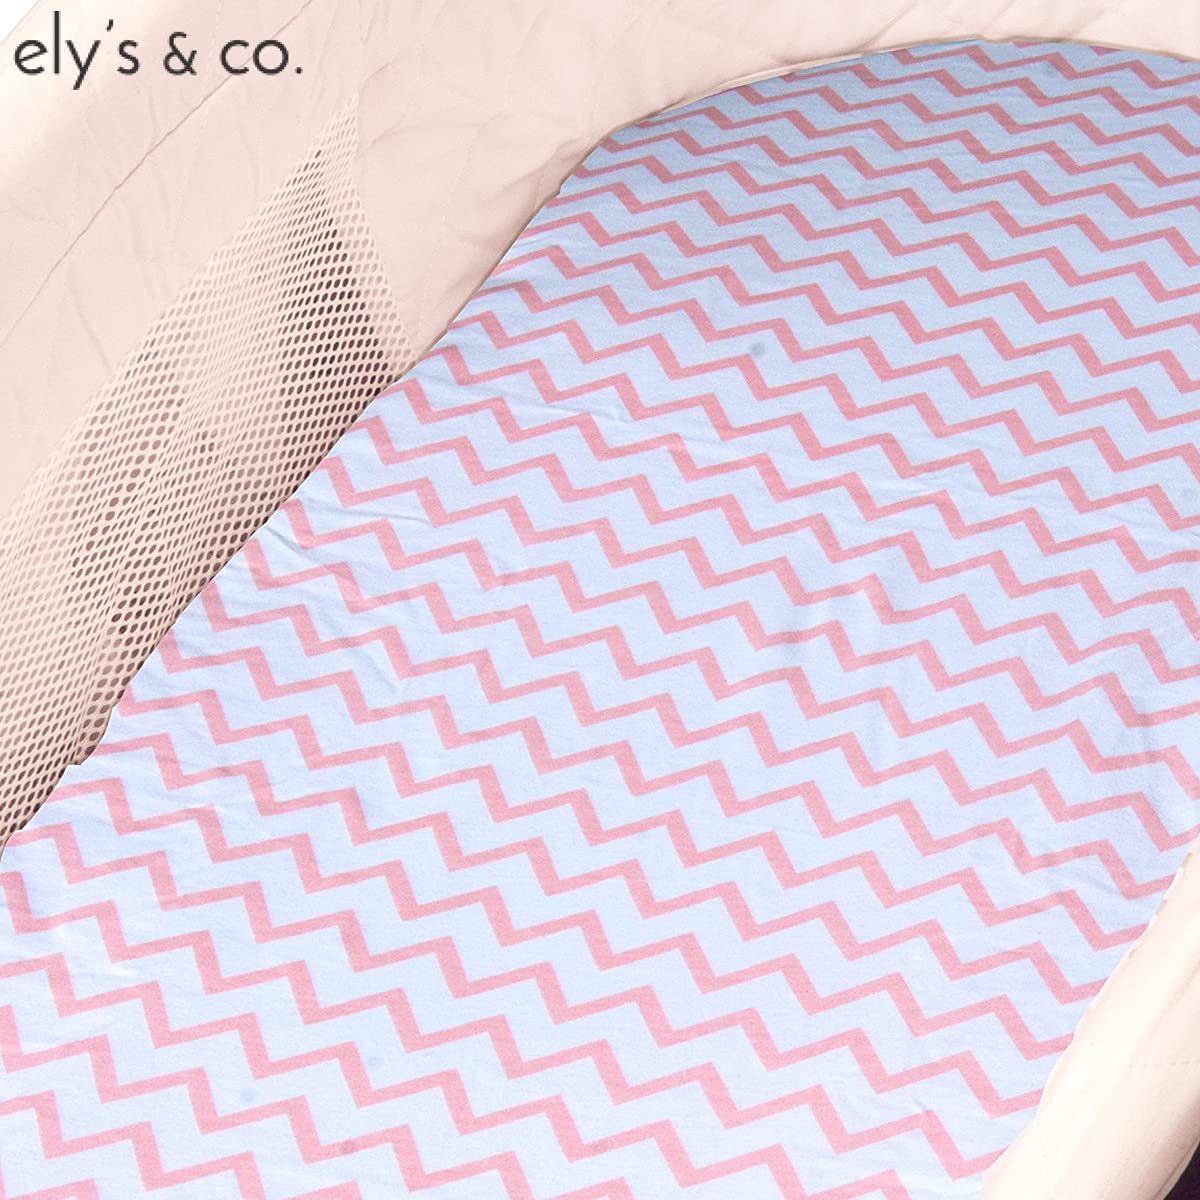 Bassinet Sheet Set 2 Pack 100% Jersey Cotton for Baby Girl by Ely's & Co. - Pink Chevron and Polka Dot by Ely's & Co. - (For 8 piece(s))